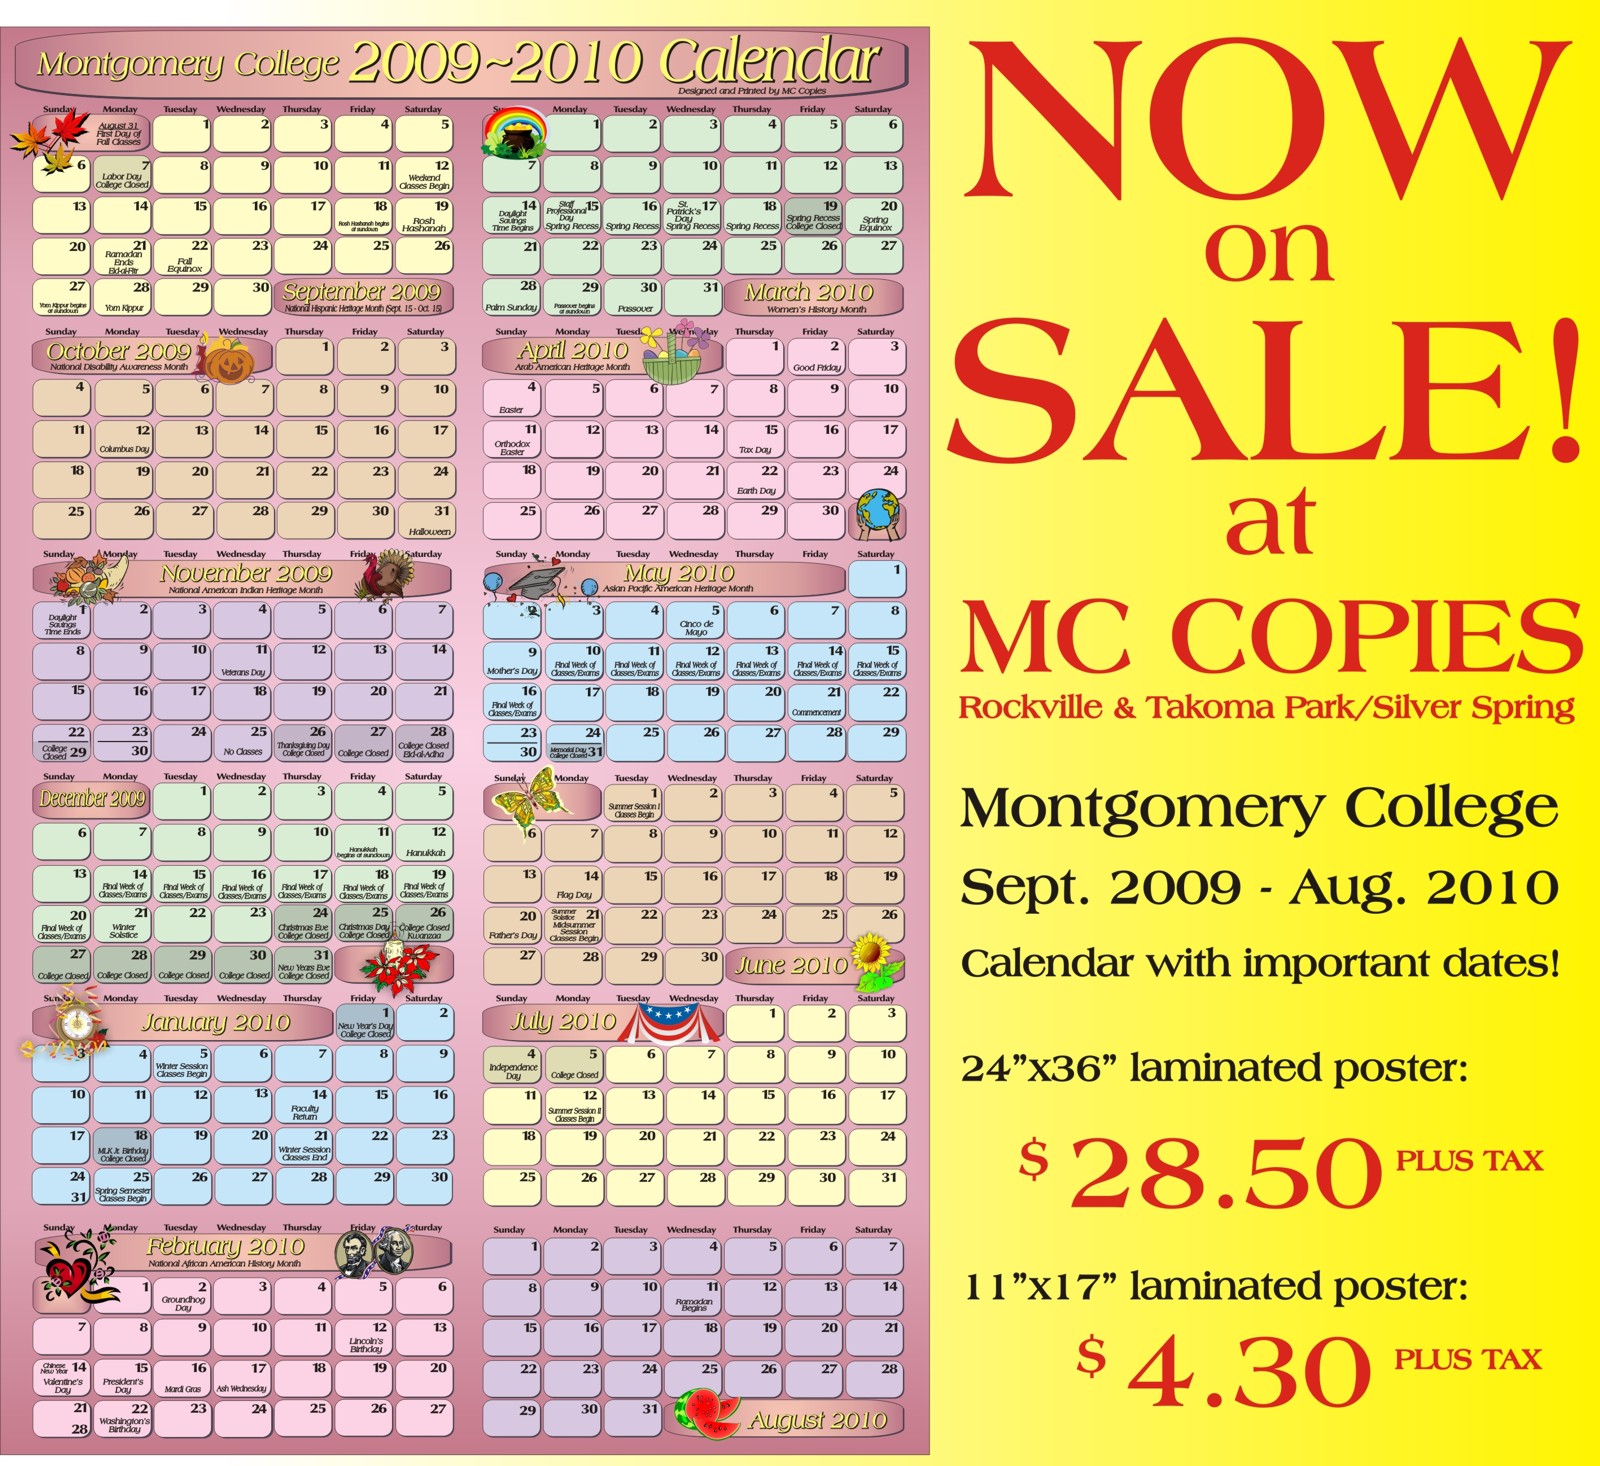 New Calendar Now Available for Sale from MC Copies